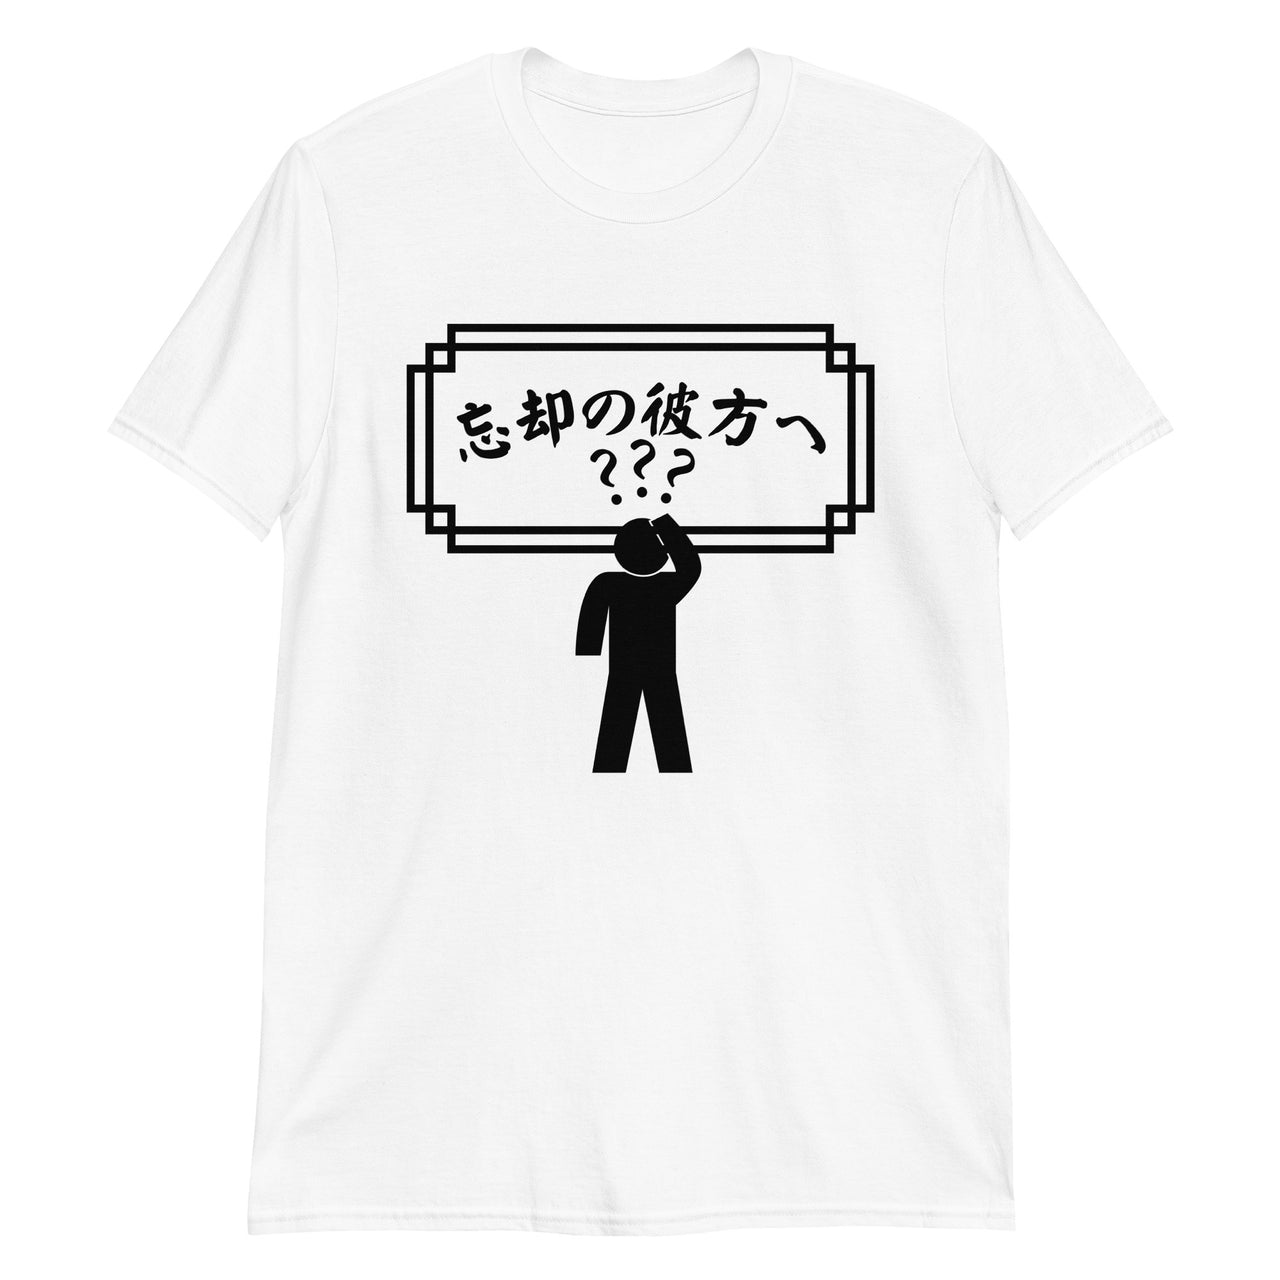 Forgetfulness To Oblivion and Beyond in Japanese T-Shirt